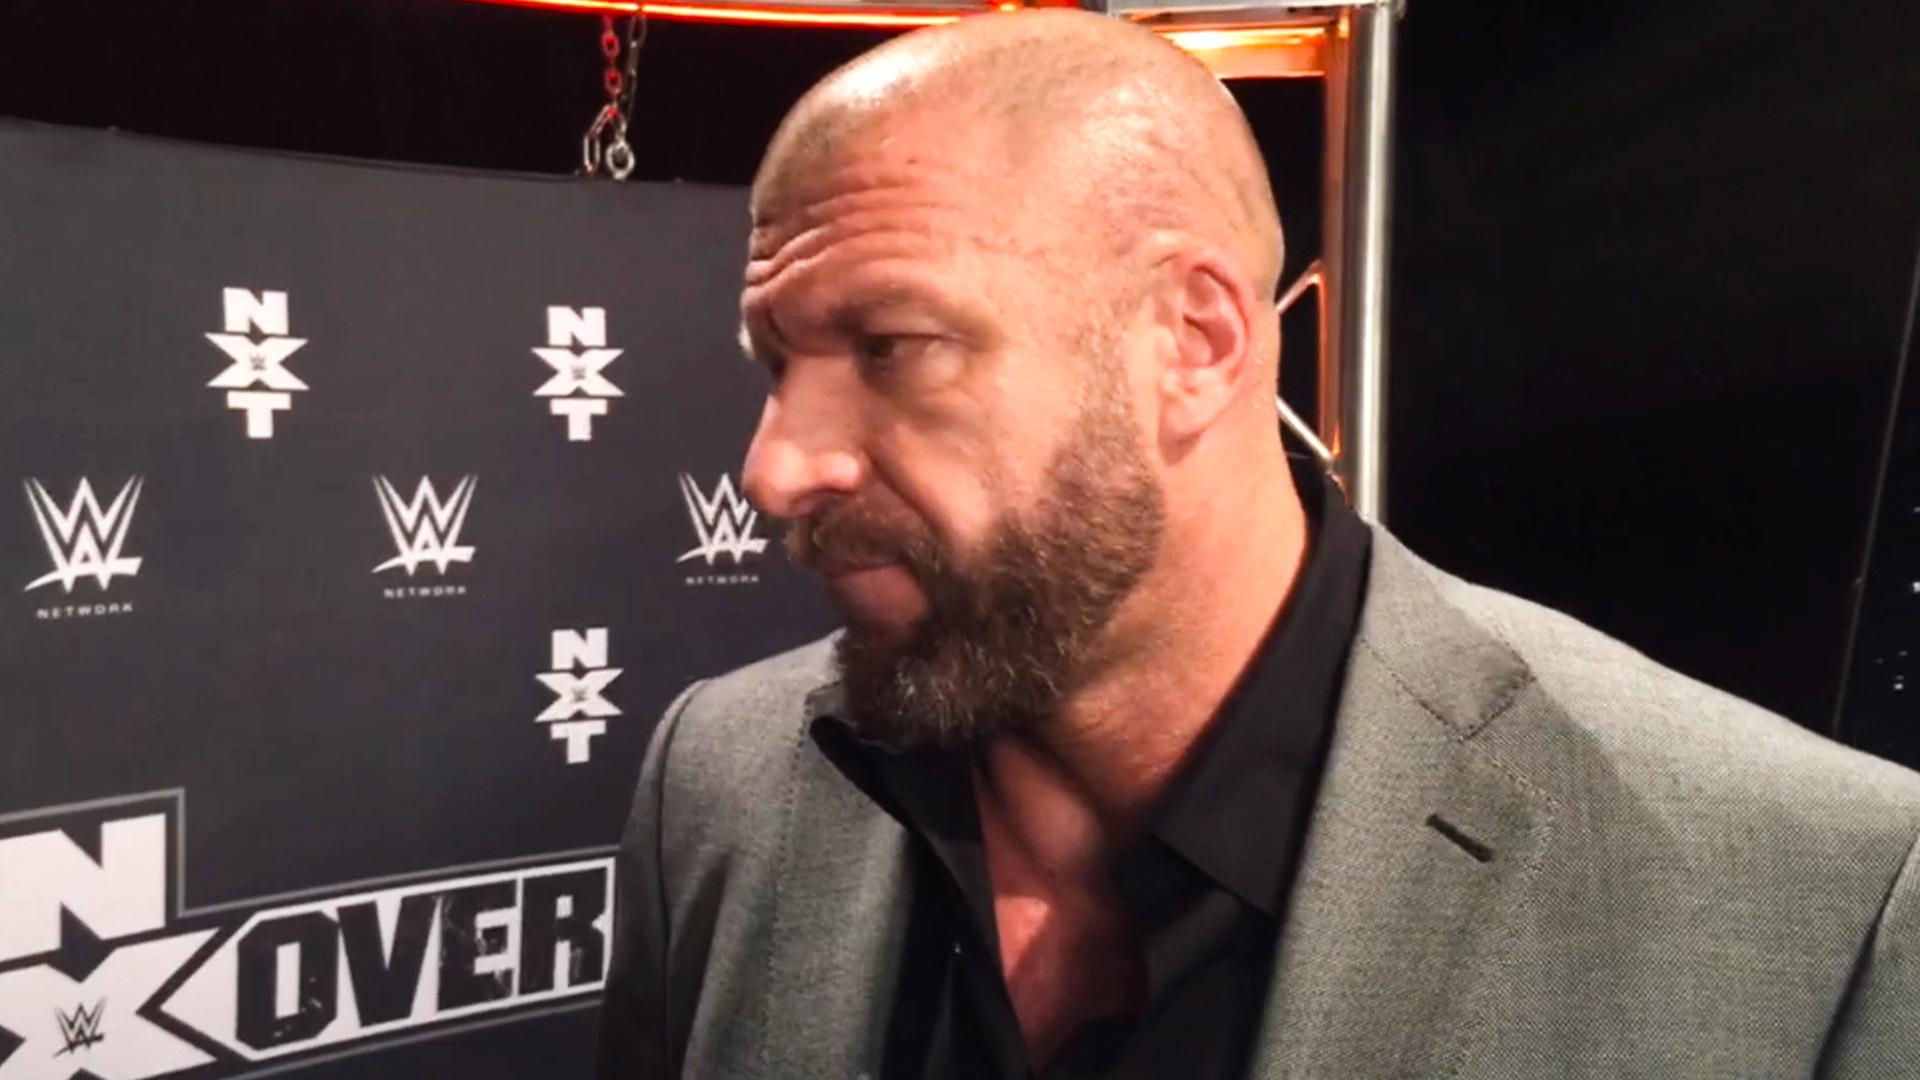 Triple H on TakeOver Toronto: II title matches, Matt Riddle being